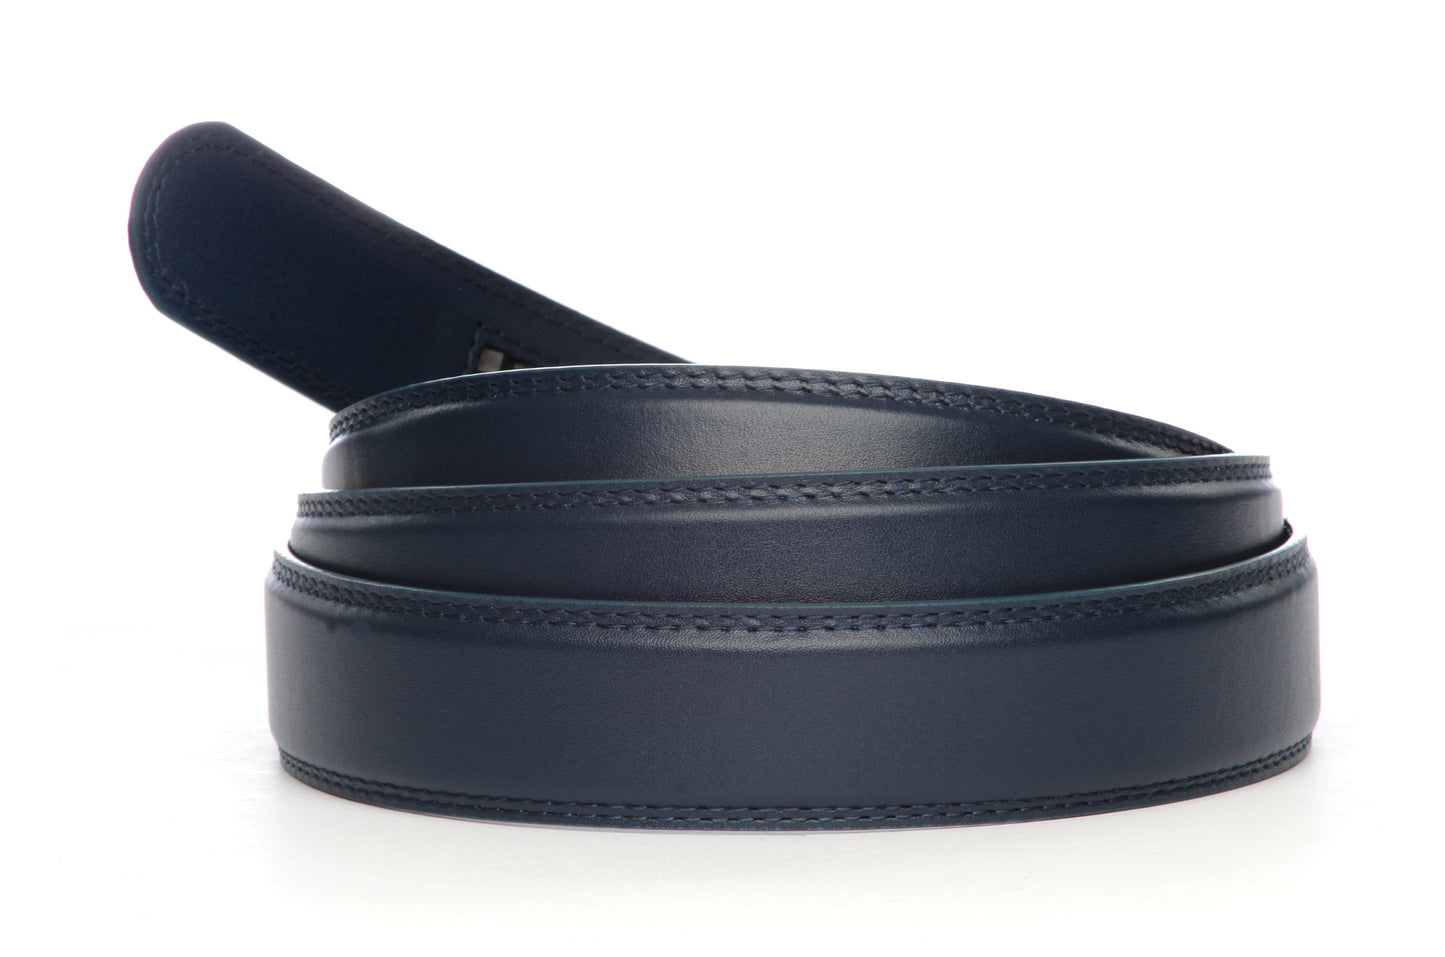 Men's leather belt strap in navy with a 1.25-inch width, formal look, full grain leather